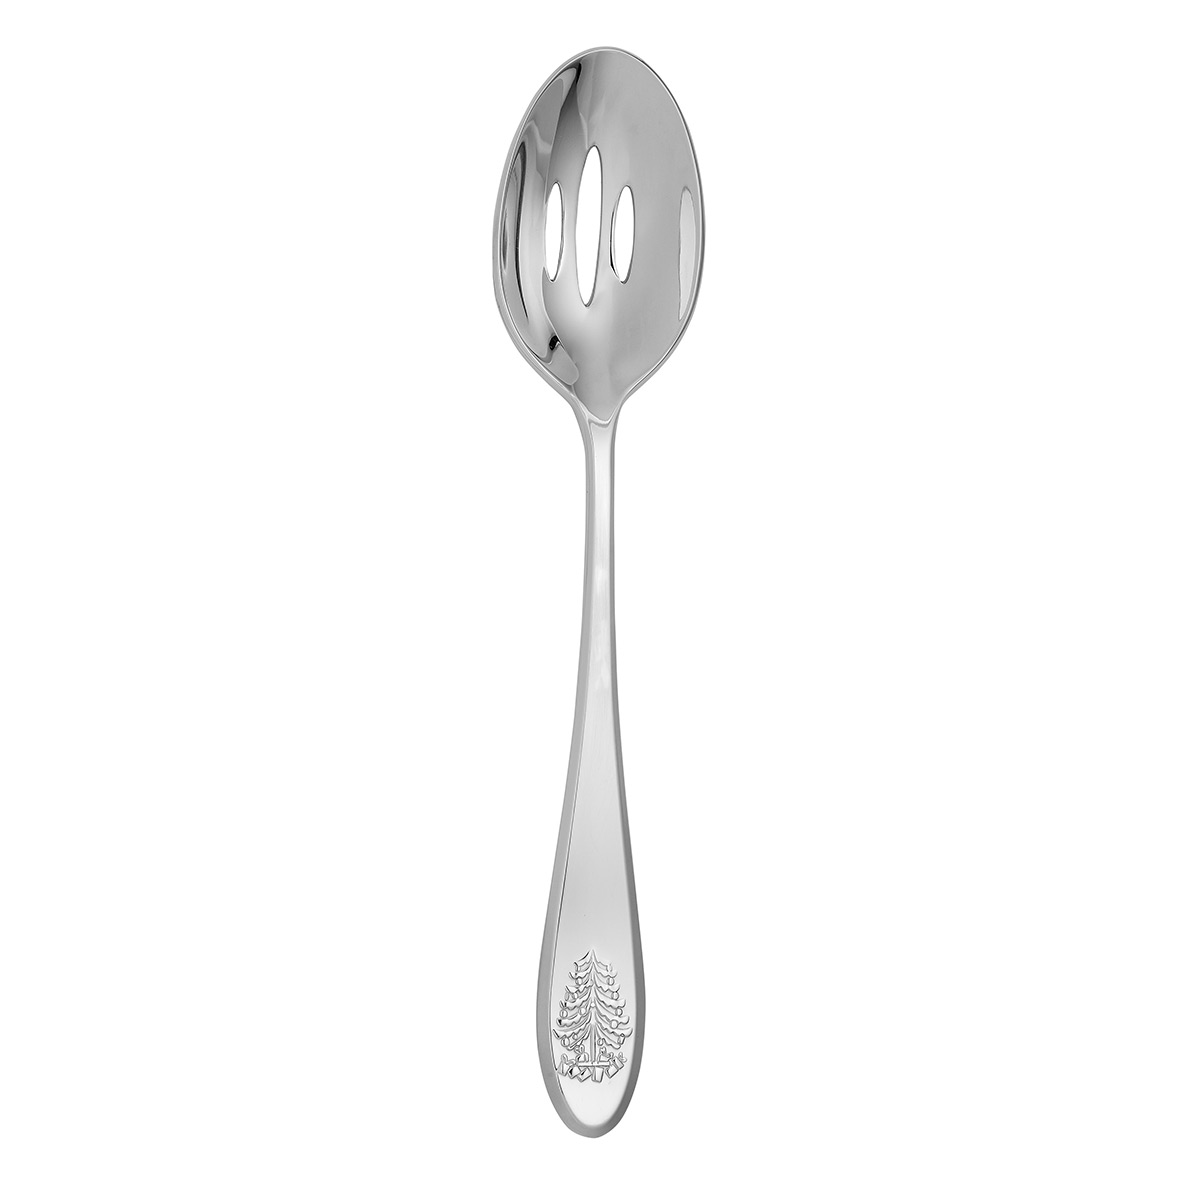 Spode Christmas Tree Cutlery Slotted Spoon, Stainless